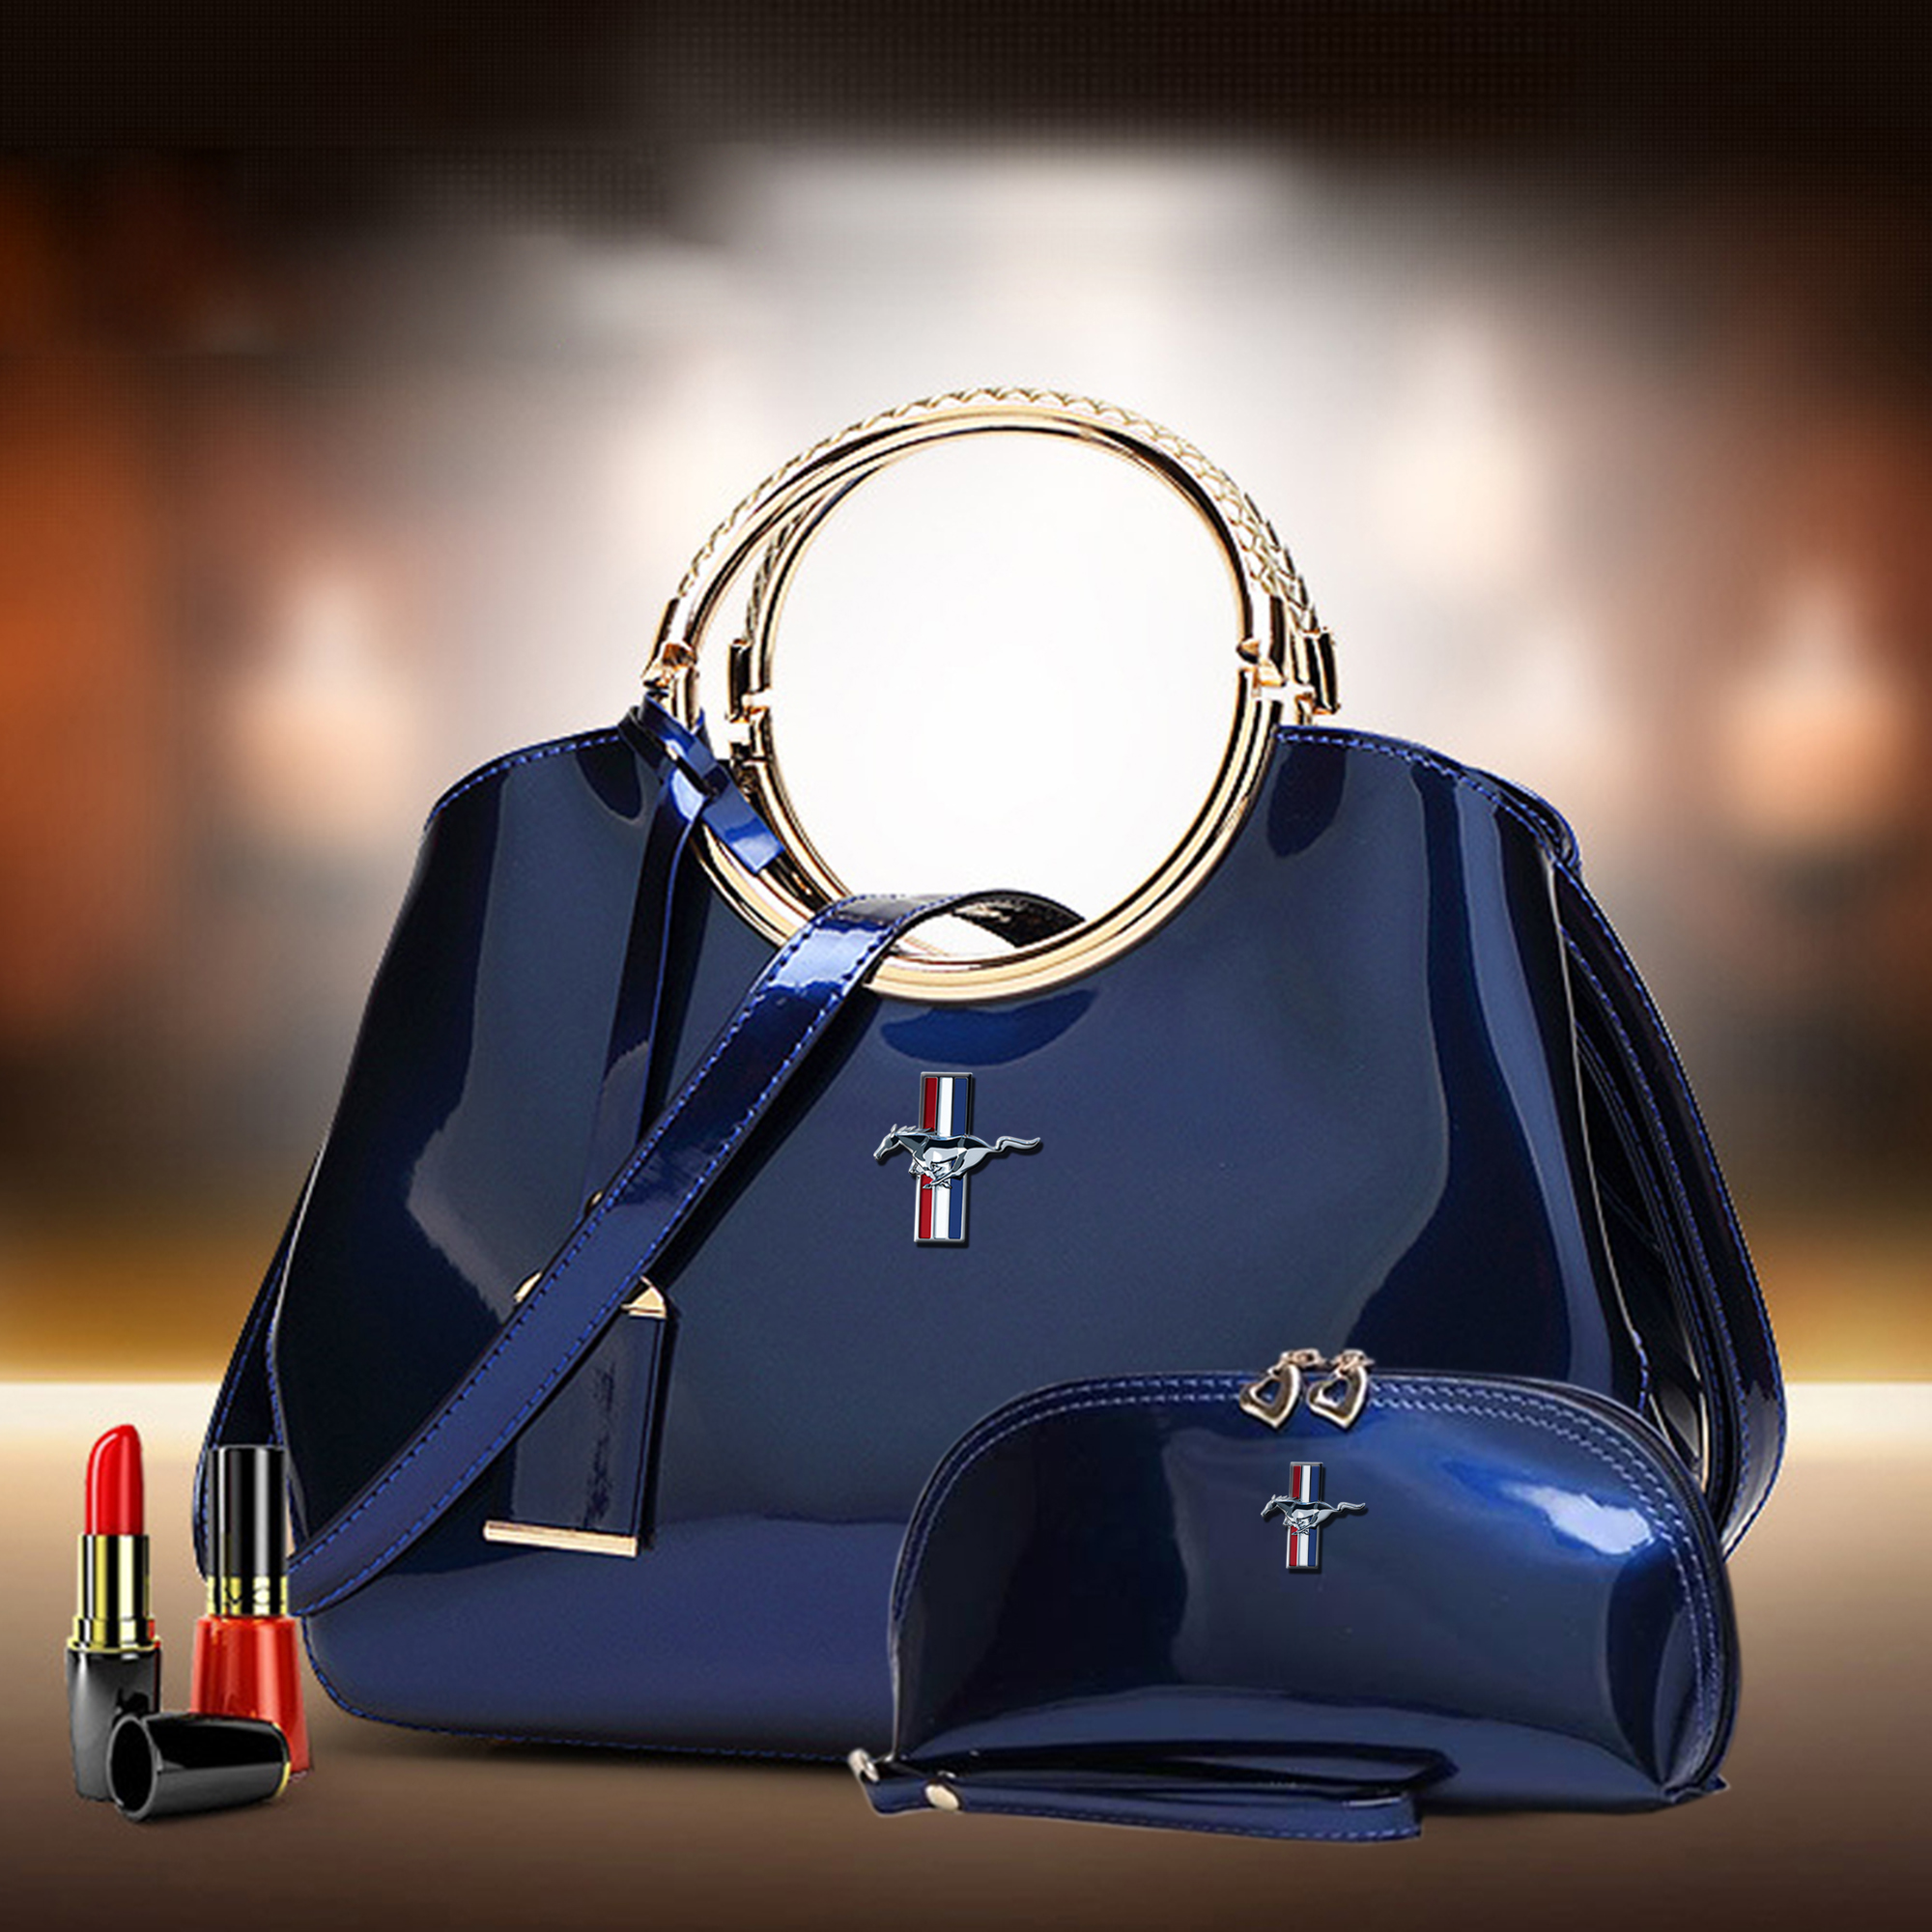 Mustang Luxury Purses With Free Tana Elegant Wallets Matching 